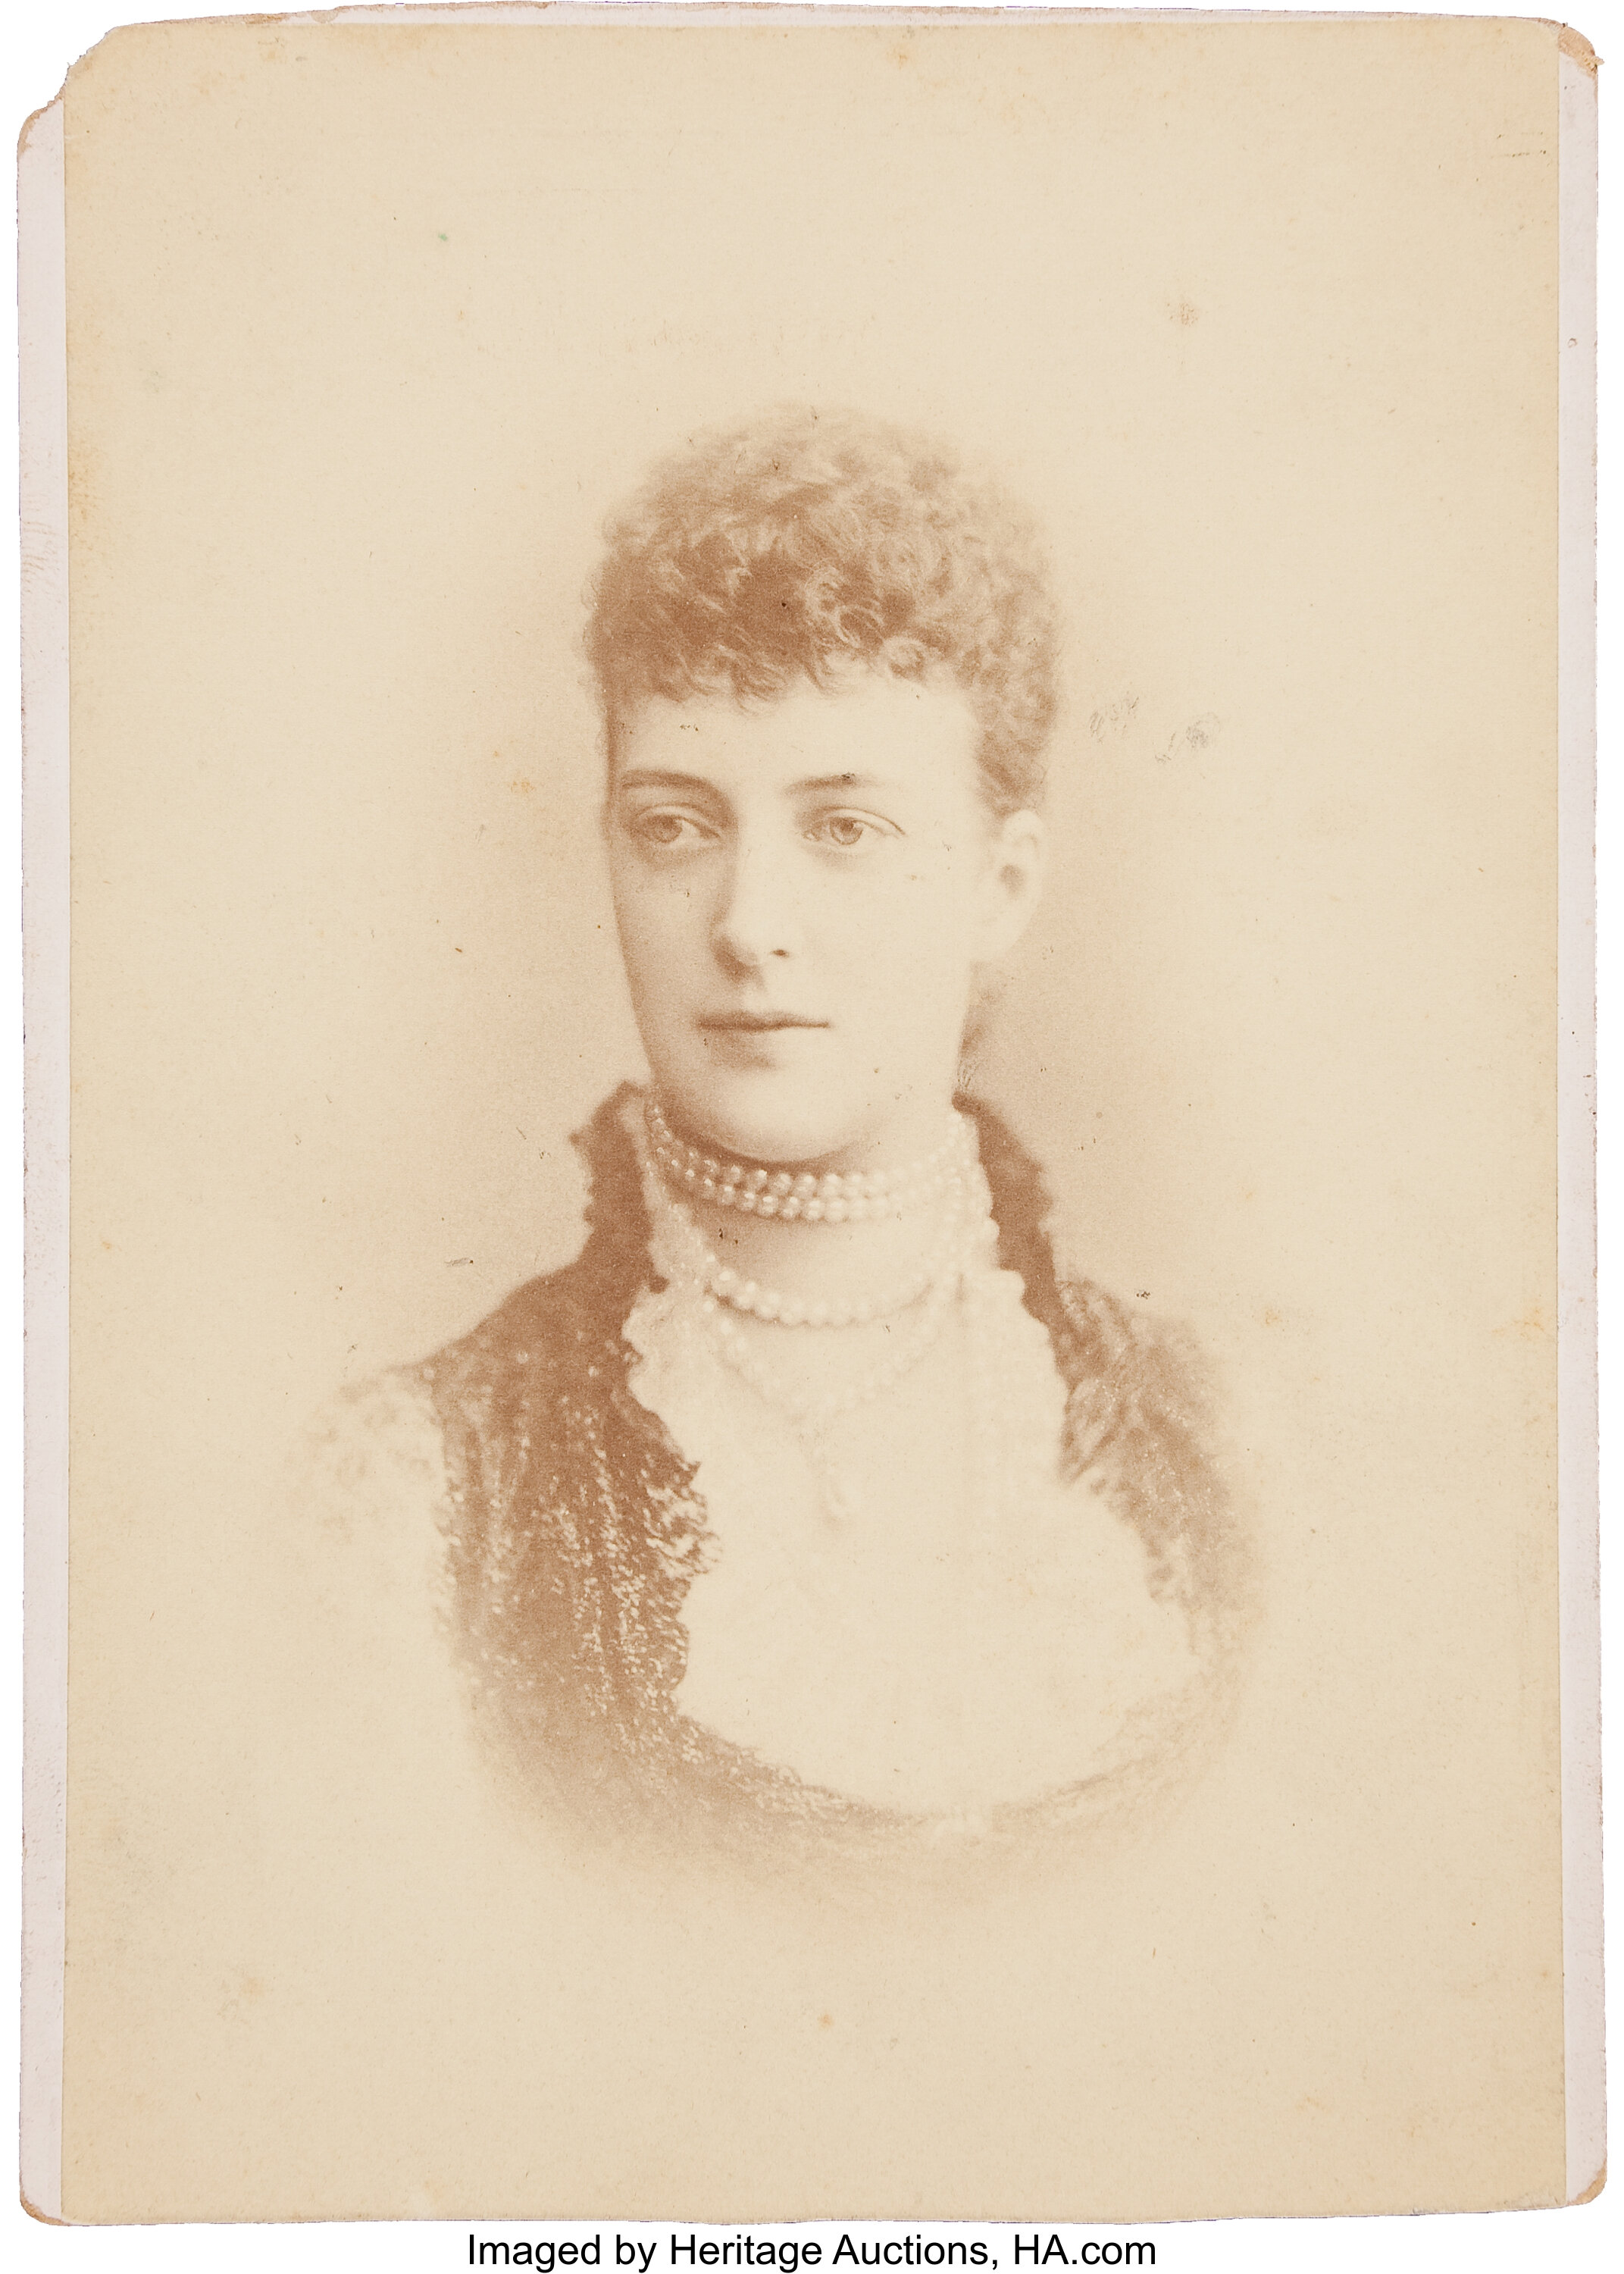 Annie Oakley: A Cabinet Photo of Britain's Queen-to-be Alexandra | Lot  #44016 | Heritage Auctions